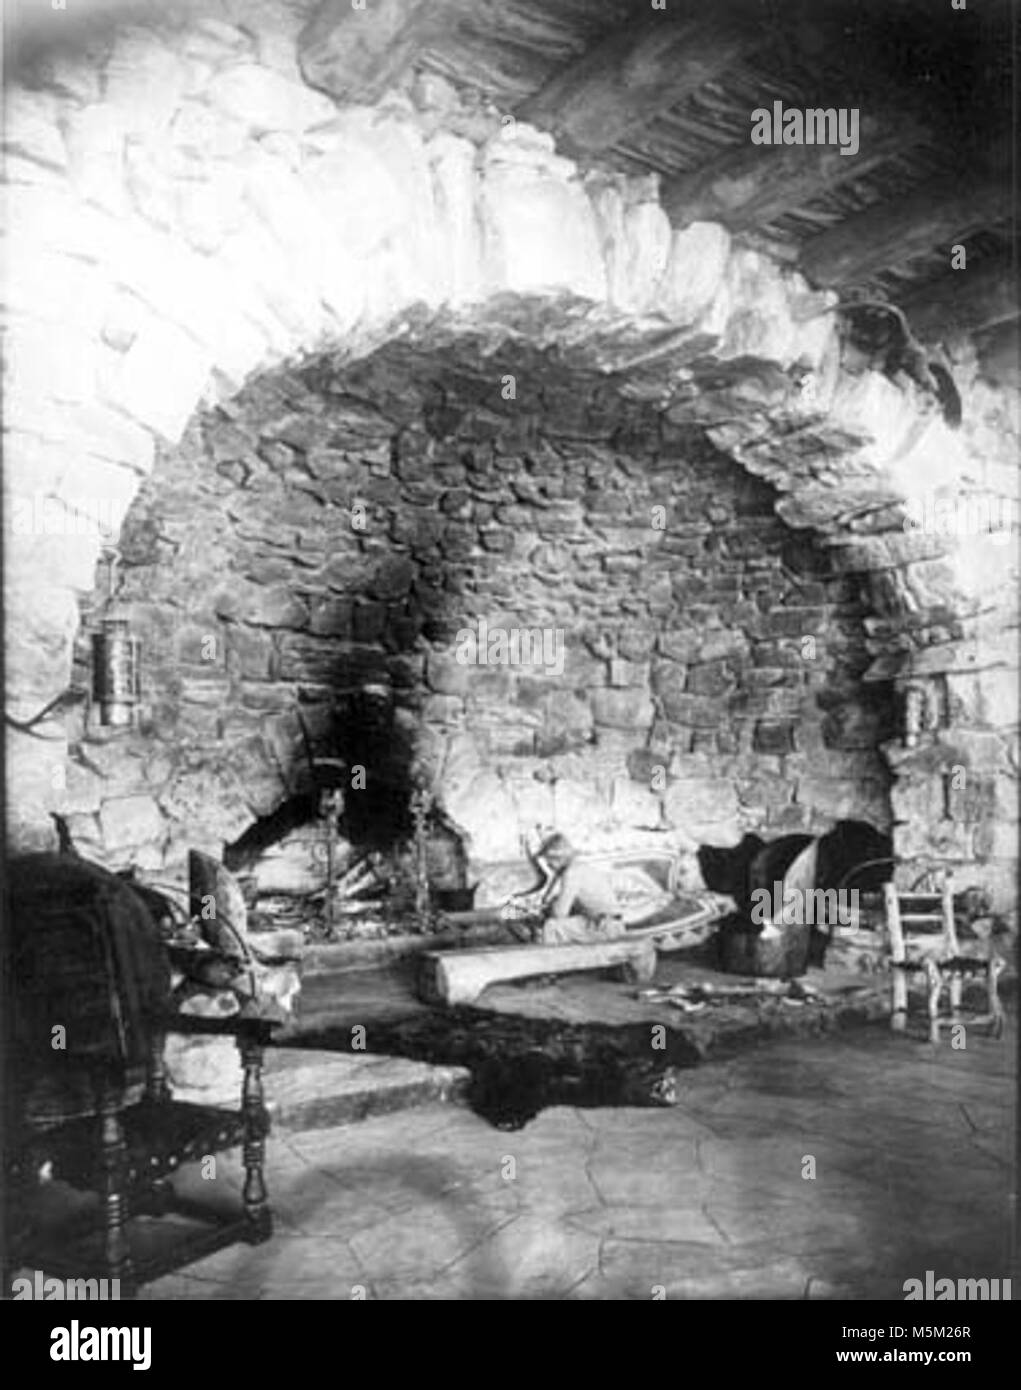 Grand Canyon Historic- Hermits Rest Interior c  . Harveycar guide at hermits rest fireplace, looking south.  Mounted eagle above. Hermit rim road (W rim drive)  Circa 1916.  Fred harvey company photo. Stock Photo